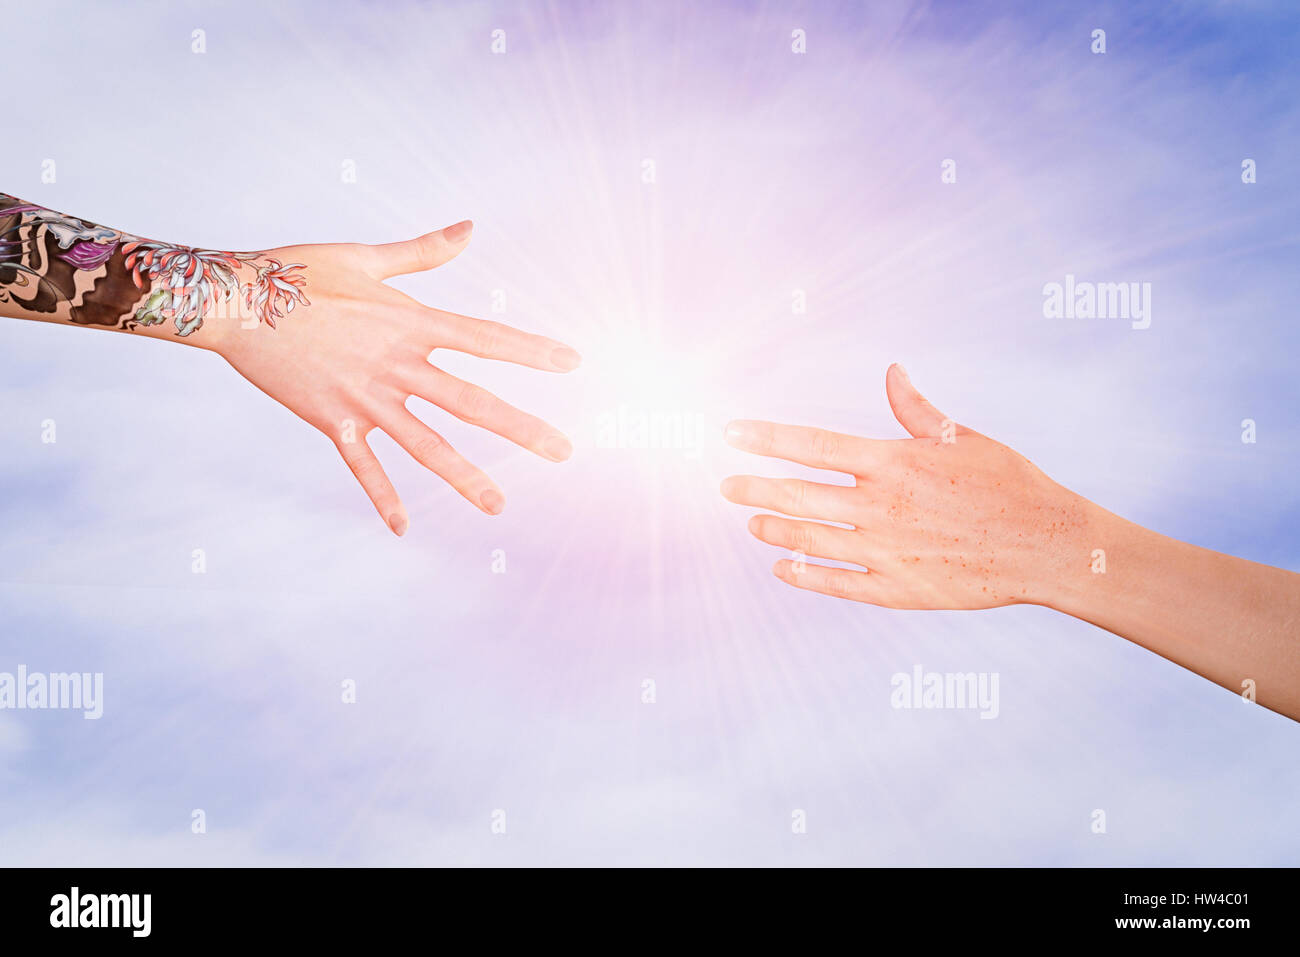 Hands with tattoos and freckles reaching in sky Stock Photo